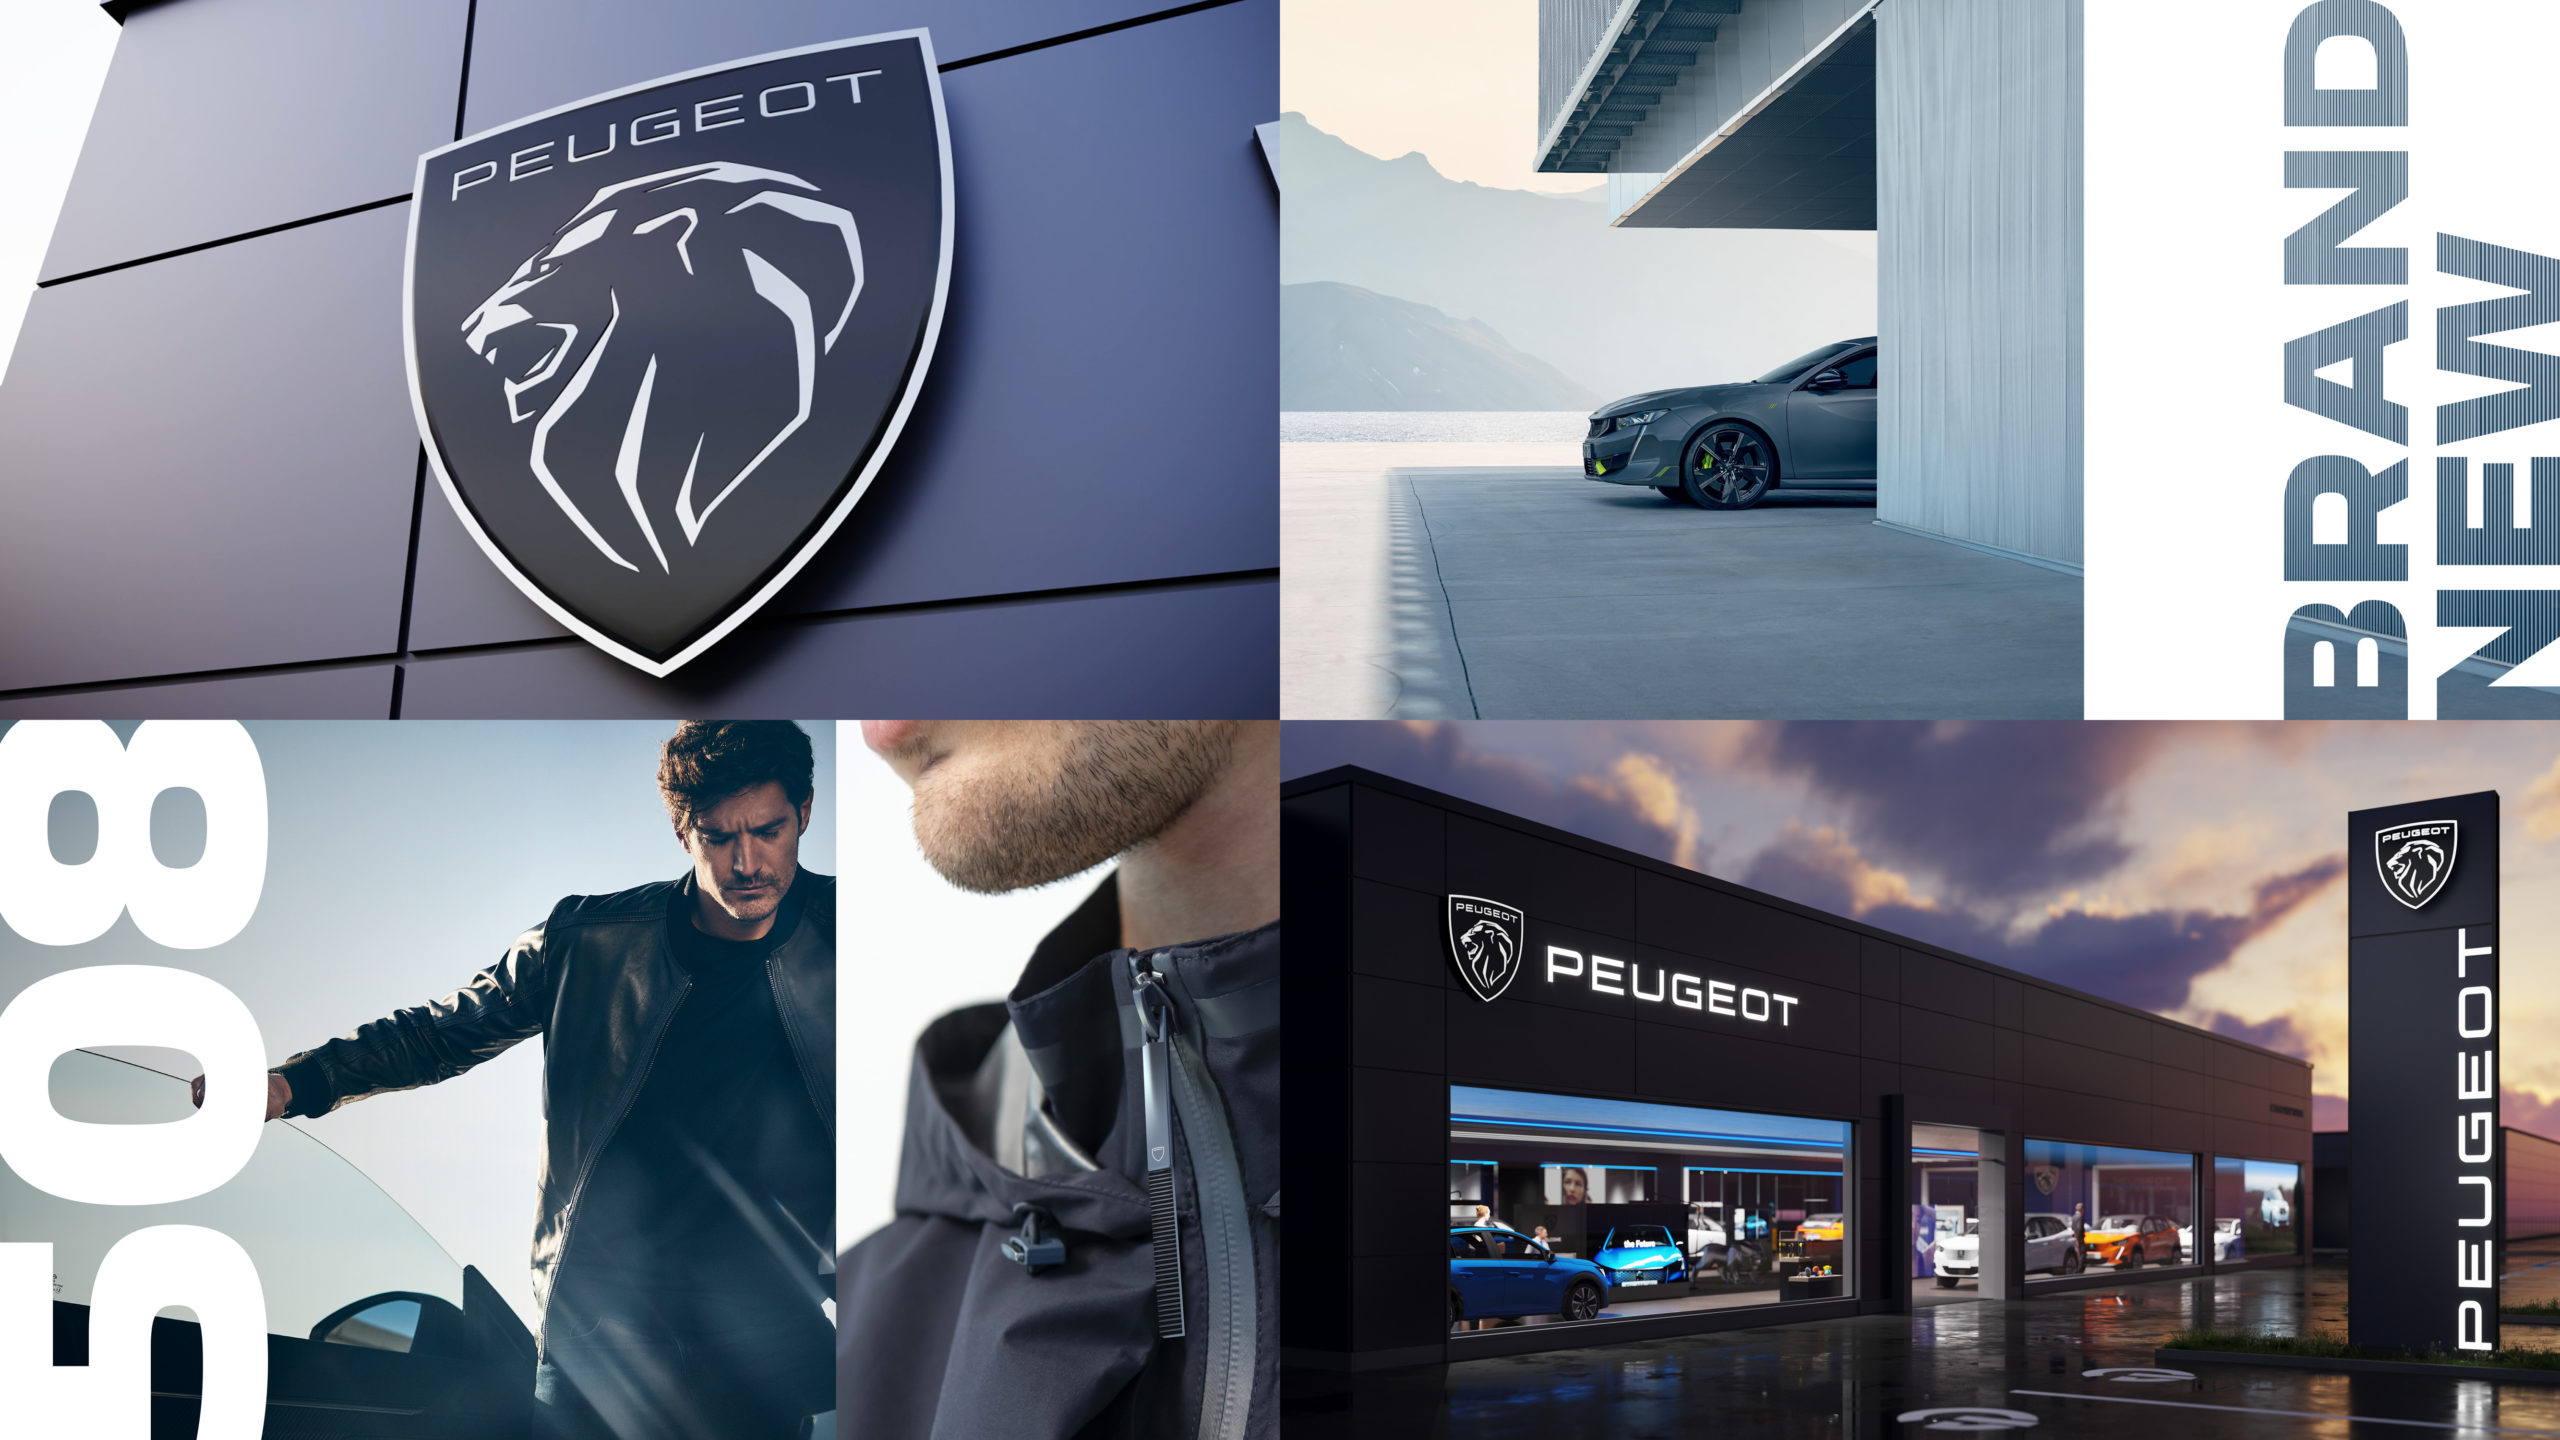 Stellantis takes actions, Peugeot upscales brand identity